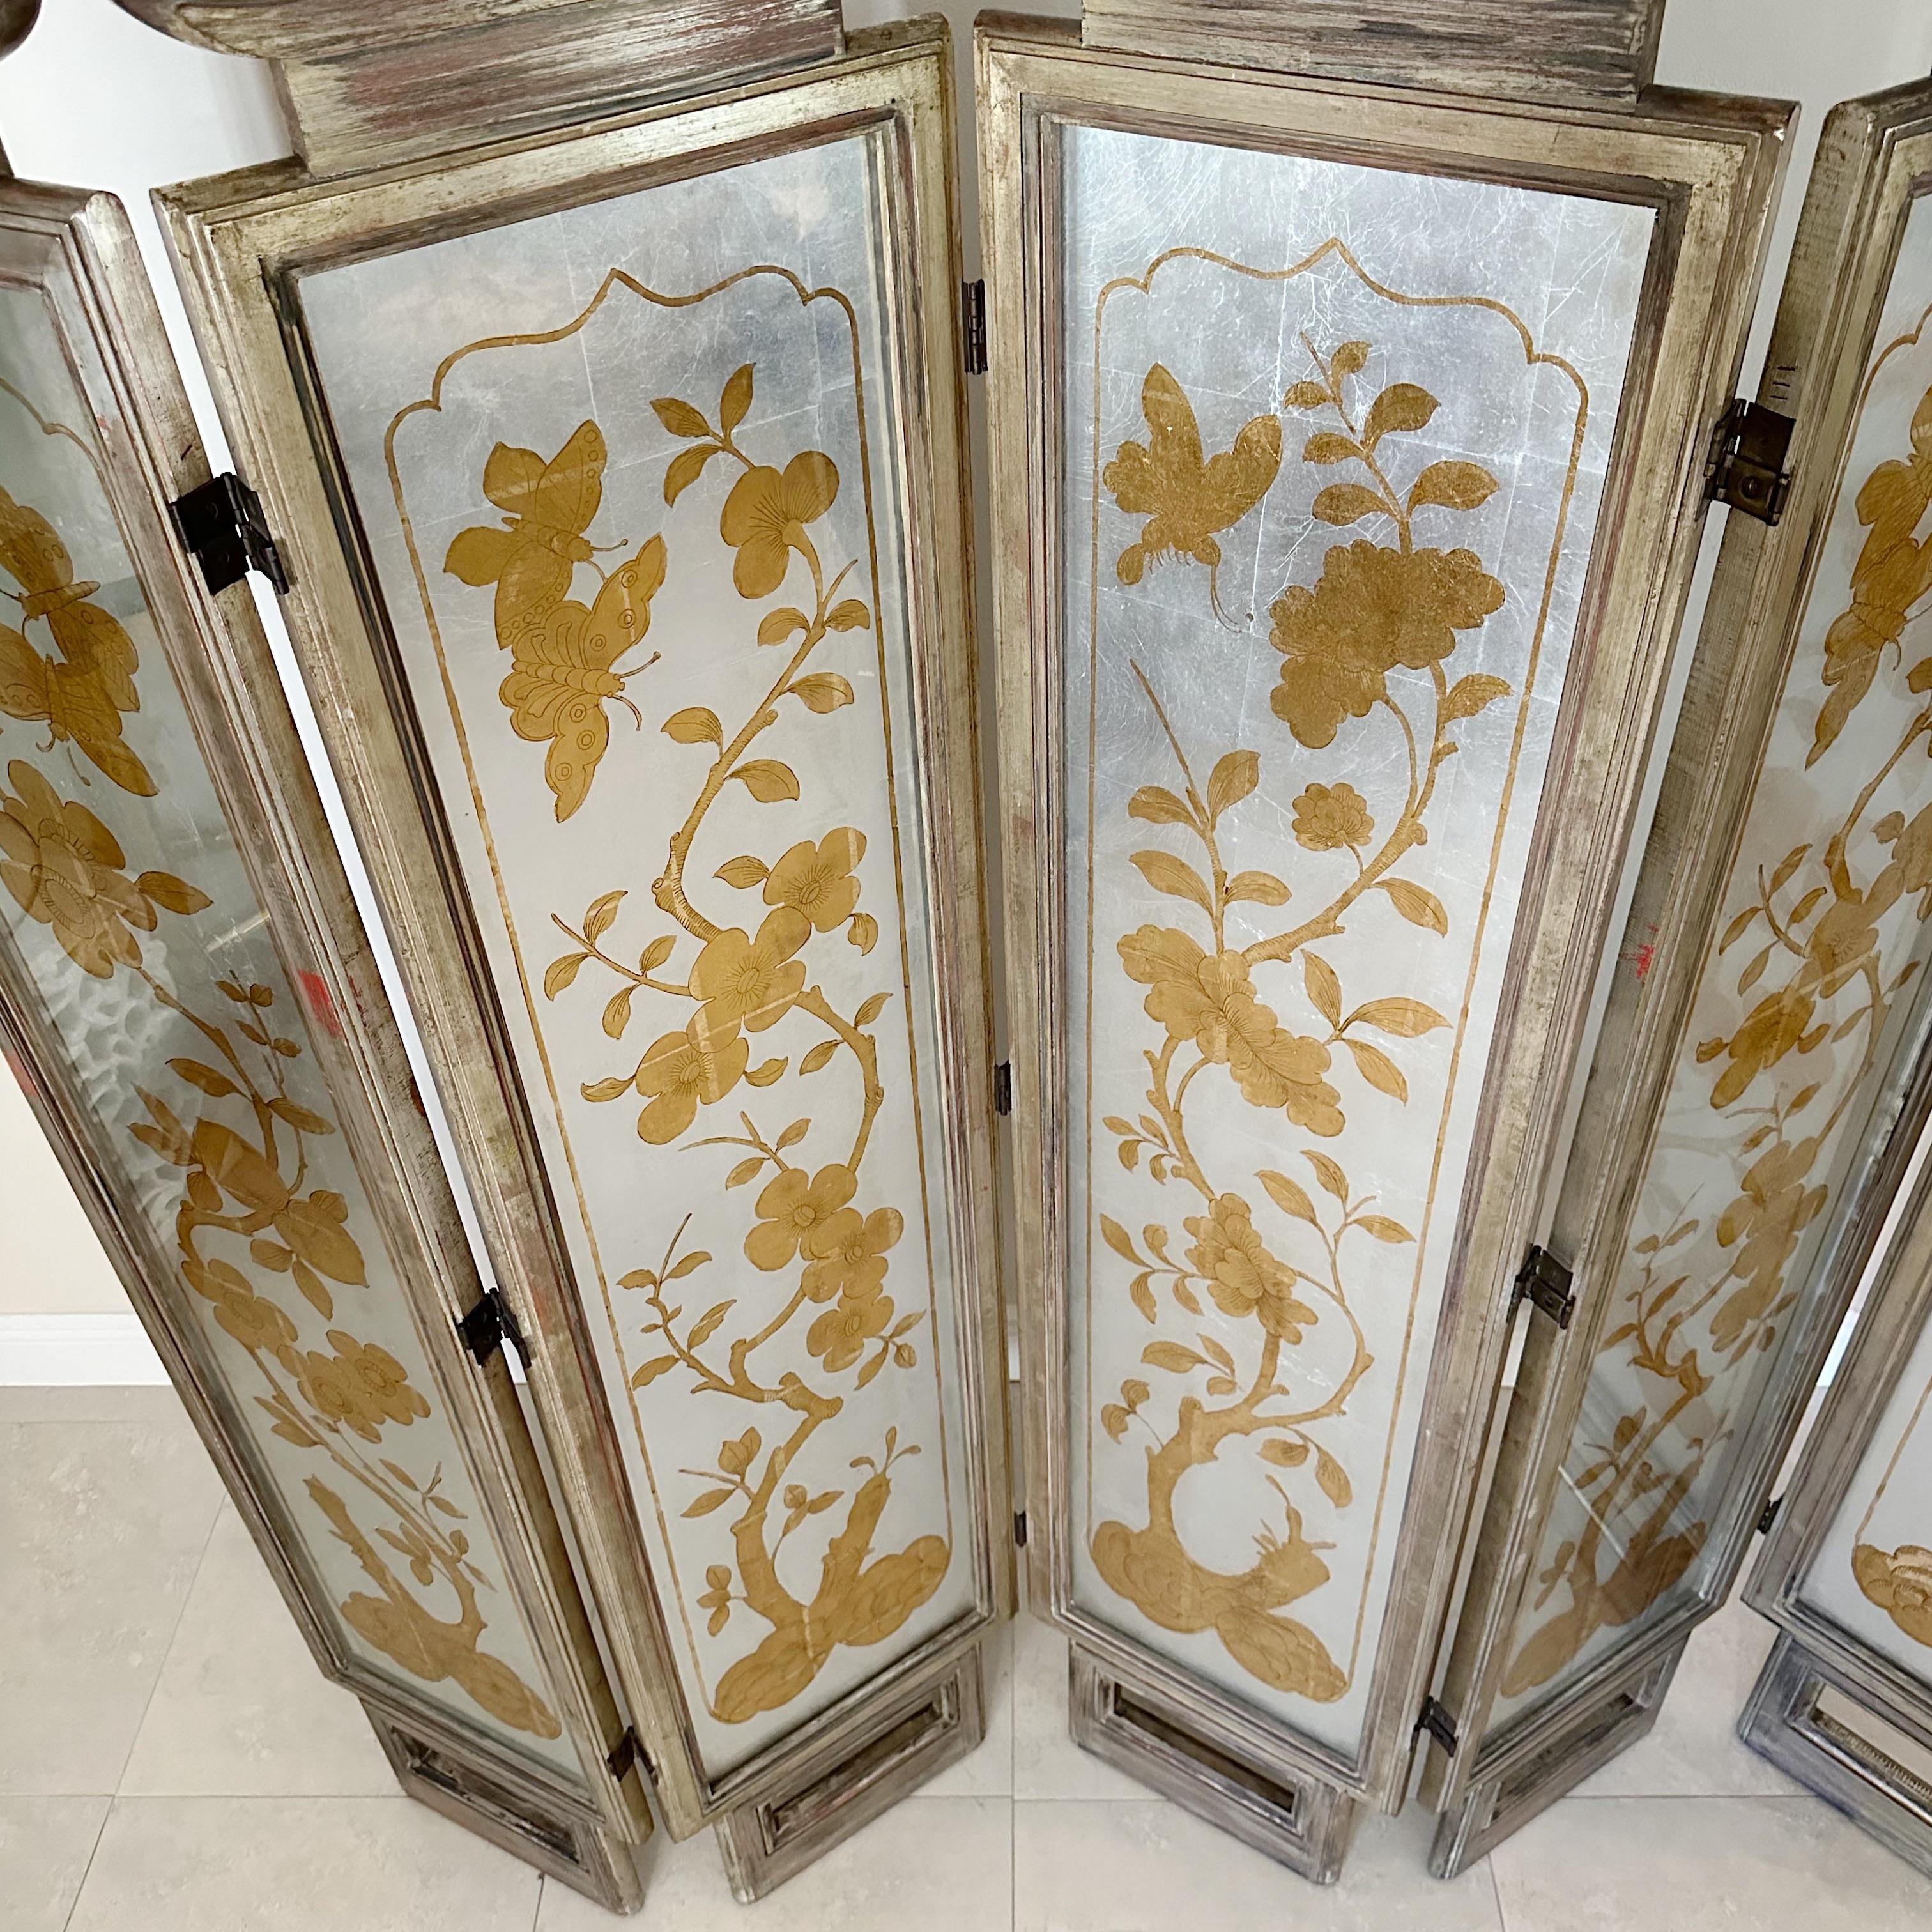 Hand-Crafted Stunning James Mont Five-Panel Eglomise Room Divider Screen From the 1950s For Sale